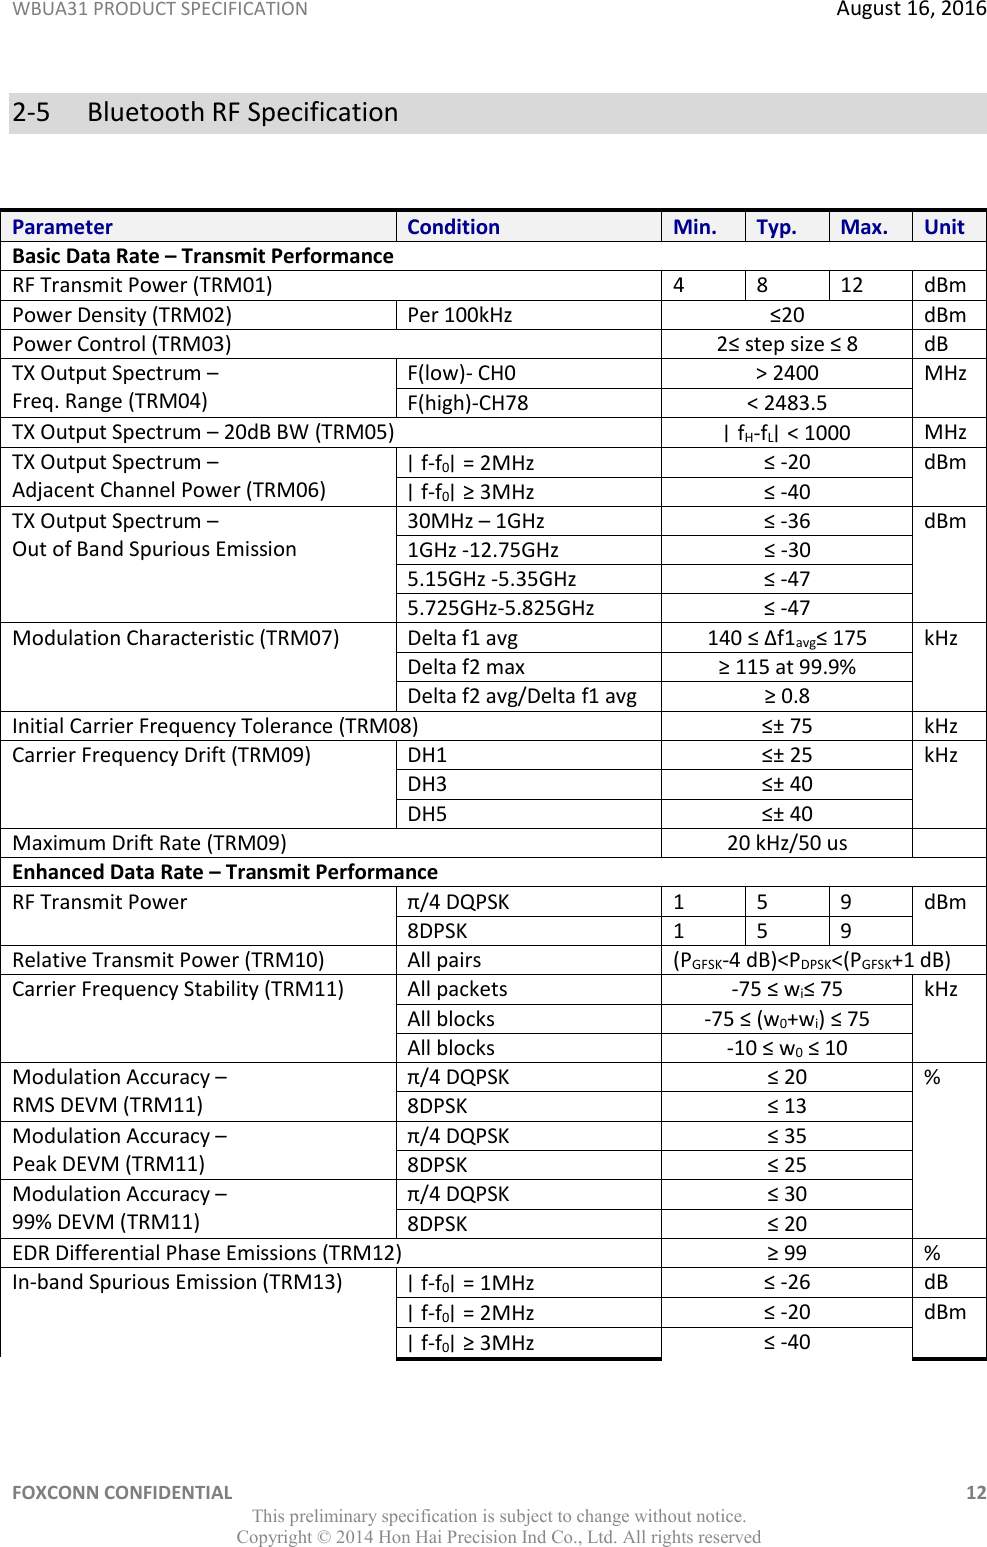 WBUA31 PRODUCT SPECIFICATION  August 16, 2016 FOXCONN CONFIDENTIAL    12 This preliminary specification is subject to change without notice. Copyright ©  2014 Hon Hai Precision Ind Co., Ltd. All rights reserved 2-5  Bluetooth RF Specification  Parameter Condition Min. Typ. Max. Unit Basic Data Rate – Transmit Performance RF Transmit Power (TRM01) 4 8 12 dBm Power Density (TRM02) Per 100kHz ≤20 dBm Power Control (TRM03) 2≤ step size ≤ 8 dB TX Output Spectrum –  Freq. Range (TRM04) F(low)- CH0 &gt; 2400 MHz F(high)-CH78 &lt; 2483.5 TX Output Spectrum – 20dB BW (TRM05) ∣fH-fL∣&lt; 1000 MHz TX Output Spectrum –  Adjacent Channel Power (TRM06) ∣f-f0∣= 2MHz ≤ -20 dBm ∣f-f0∣≥ 3MHz ≤ -40 TX Output Spectrum –  Out of Band Spurious Emission 30MHz – 1GHz ≤ -36 dBm 1GHz -12.75GHz    ≤ -30 5.15GHz -5.35GHz ≤ -47 5.725GHz-5.825GHz ≤ -47 Modulation Characteristic (TRM07) Delta f1 avg 140 ≤ ∆f1avg≤ 175 kHz Delta f2 max ≥ 115 at 99.9% Delta f2 avg/Delta f1 avg     ≥ 0.8 Initial Carrier Frequency Tolerance (TRM08) ≤± 75 kHz Carrier Frequency Drift (TRM09) DH1 ≤± 25 kHz DH3 ≤± 40 DH5 ≤± 40 Maximum Drift Rate (TRM09) 20 kHz/50 us  Enhanced Data Rate – Transmit Performance RF Transmit Power π/4 DQPSK 1 5 9 dBm 8DPSK 1 5 9 Relative Transmit Power (TRM10) All pairs (PGFSK-4 dB)&lt;PDPSK&lt;(PGFSK+1 dB) Carrier Frequency Stability (TRM11) All packets -75 ≤ wi≤ 75 kHz All blocks -75 ≤ (w0+wi) ≤ 75 All blocks -10 ≤ w0 ≤ 10 Modulation Accuracy –  RMS DEVM (TRM11) π/4 DQPSK ≤ 20 % 8DPSK ≤ 13 Modulation Accuracy –  Peak DEVM (TRM11) π/4 DQPSK ≤ 35 8DPSK ≤ 25 Modulation Accuracy –  99% DEVM (TRM11) π/4 DQPSK ≤ 30 8DPSK ≤ 20 EDR Differential Phase Emissions (TRM12) ≥ 99 % In-band Spurious Emission (TRM13) ∣f-f0∣= 1MHz ≤ -26 dB ∣f-f0∣= 2MHz ≤ -20 dBm ∣f-f0∣≥ 3MHz ≤ -40 